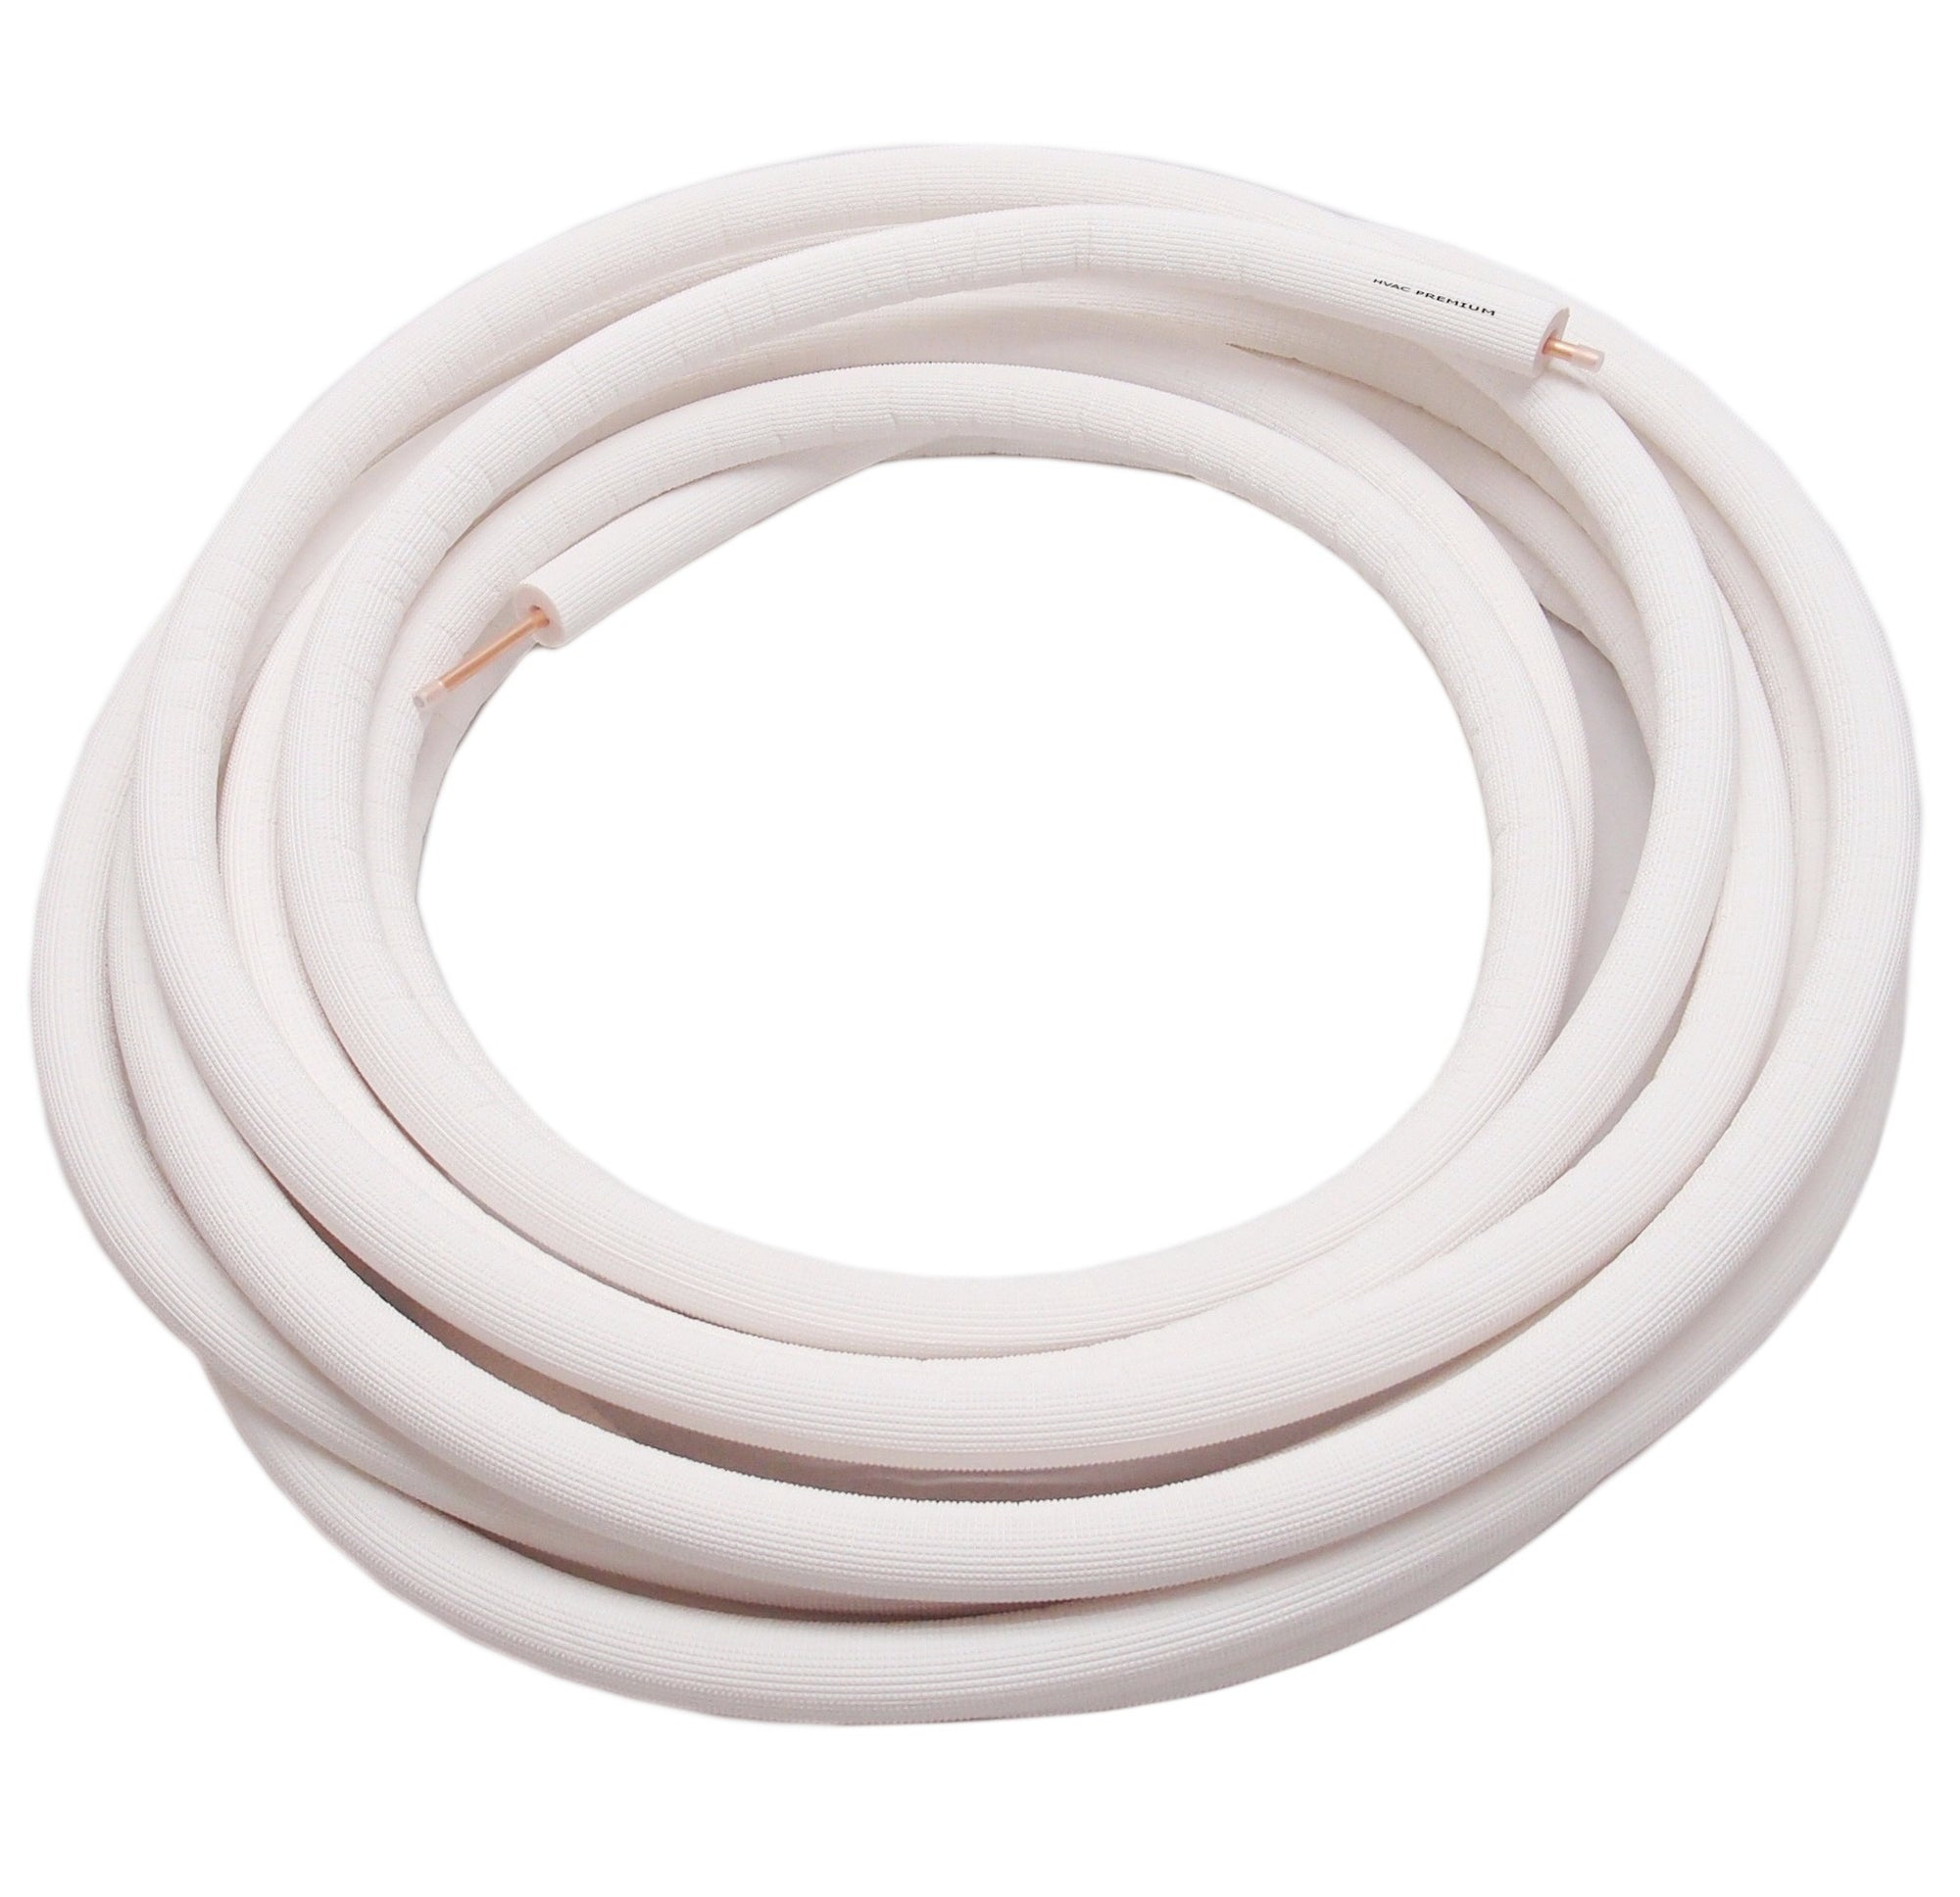 1/2" Insulated Copper Coil Line - Seamless Pipe Tube for HVAC, Refrigerant - 1/2" White Insulation - 35' Long